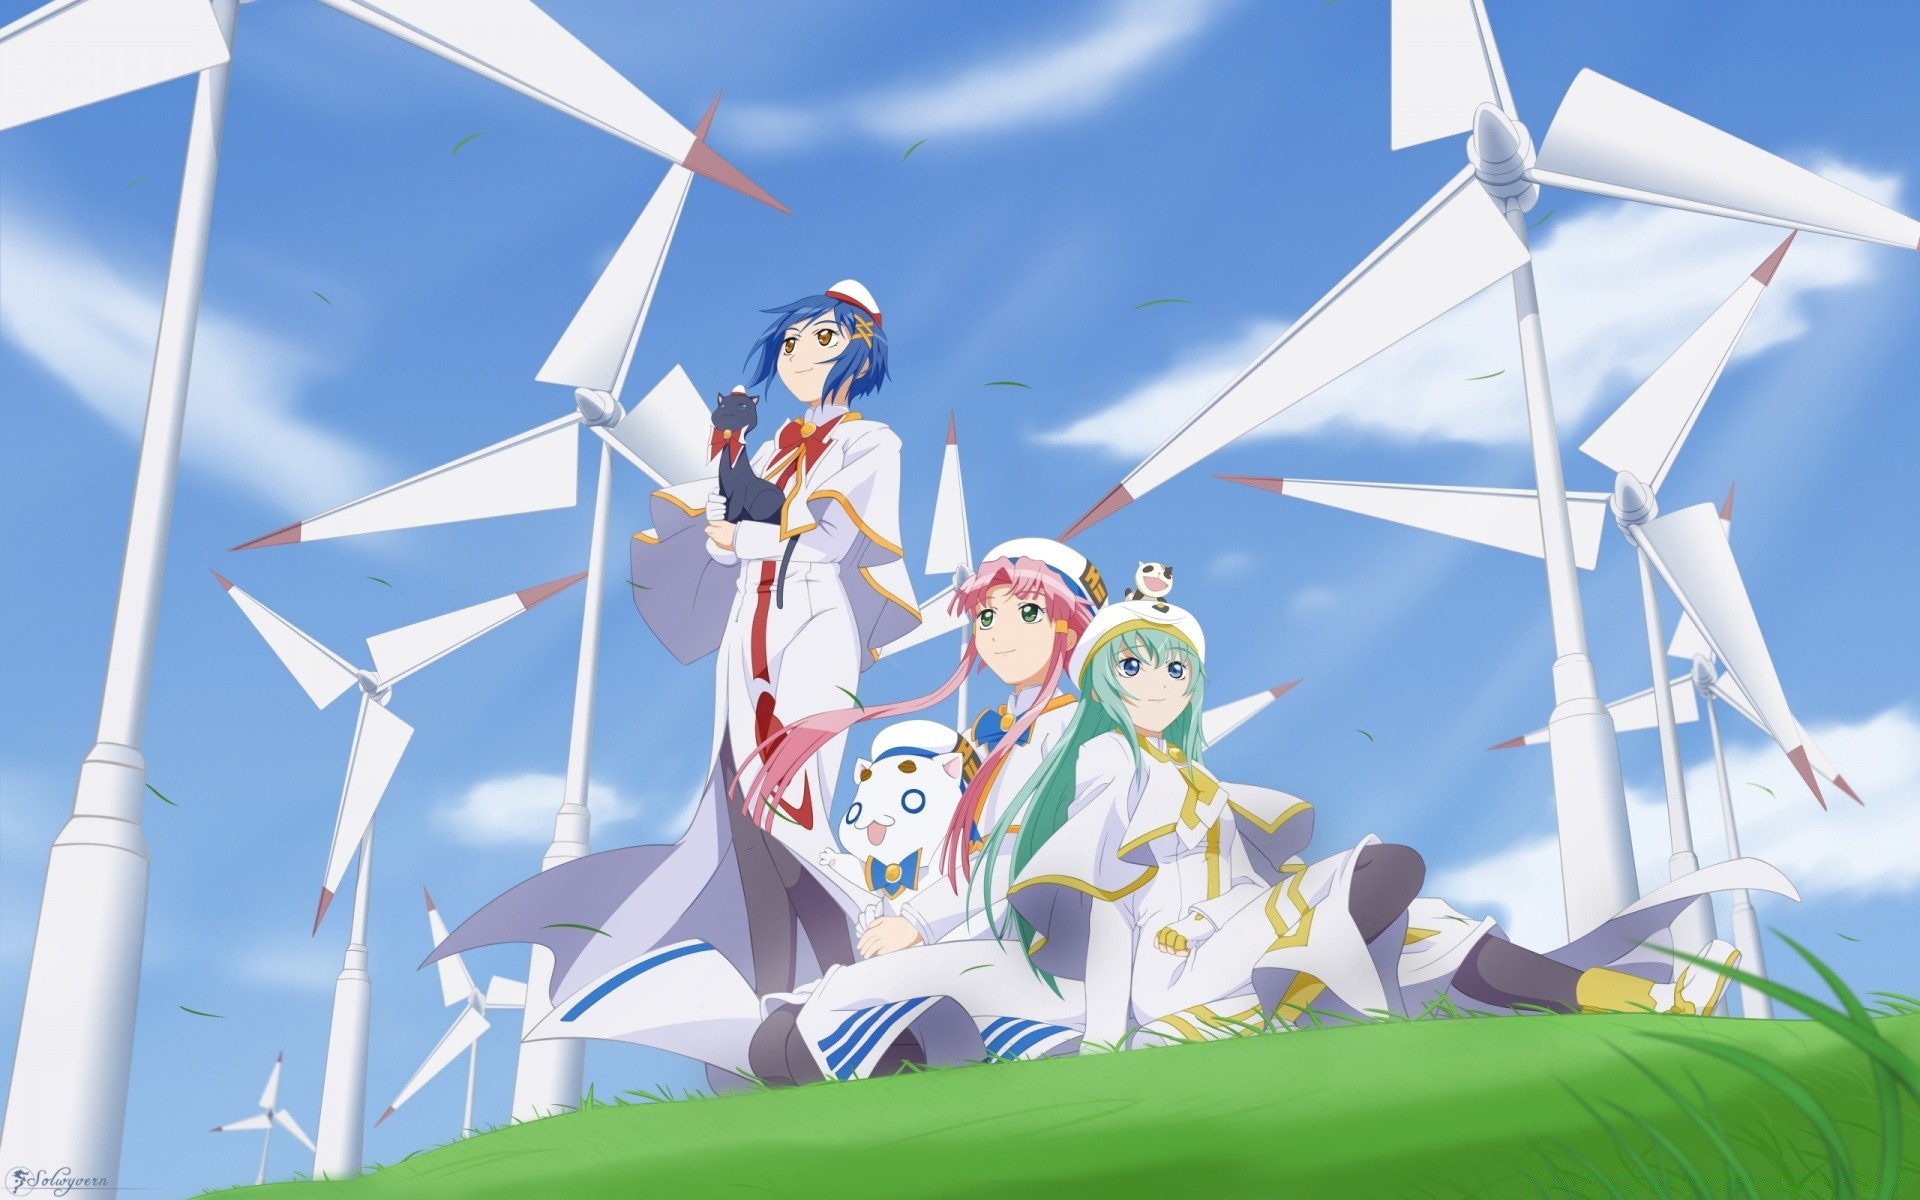 anime alternative wind energy sky windmill grinder environment technology electricity power environmental invention